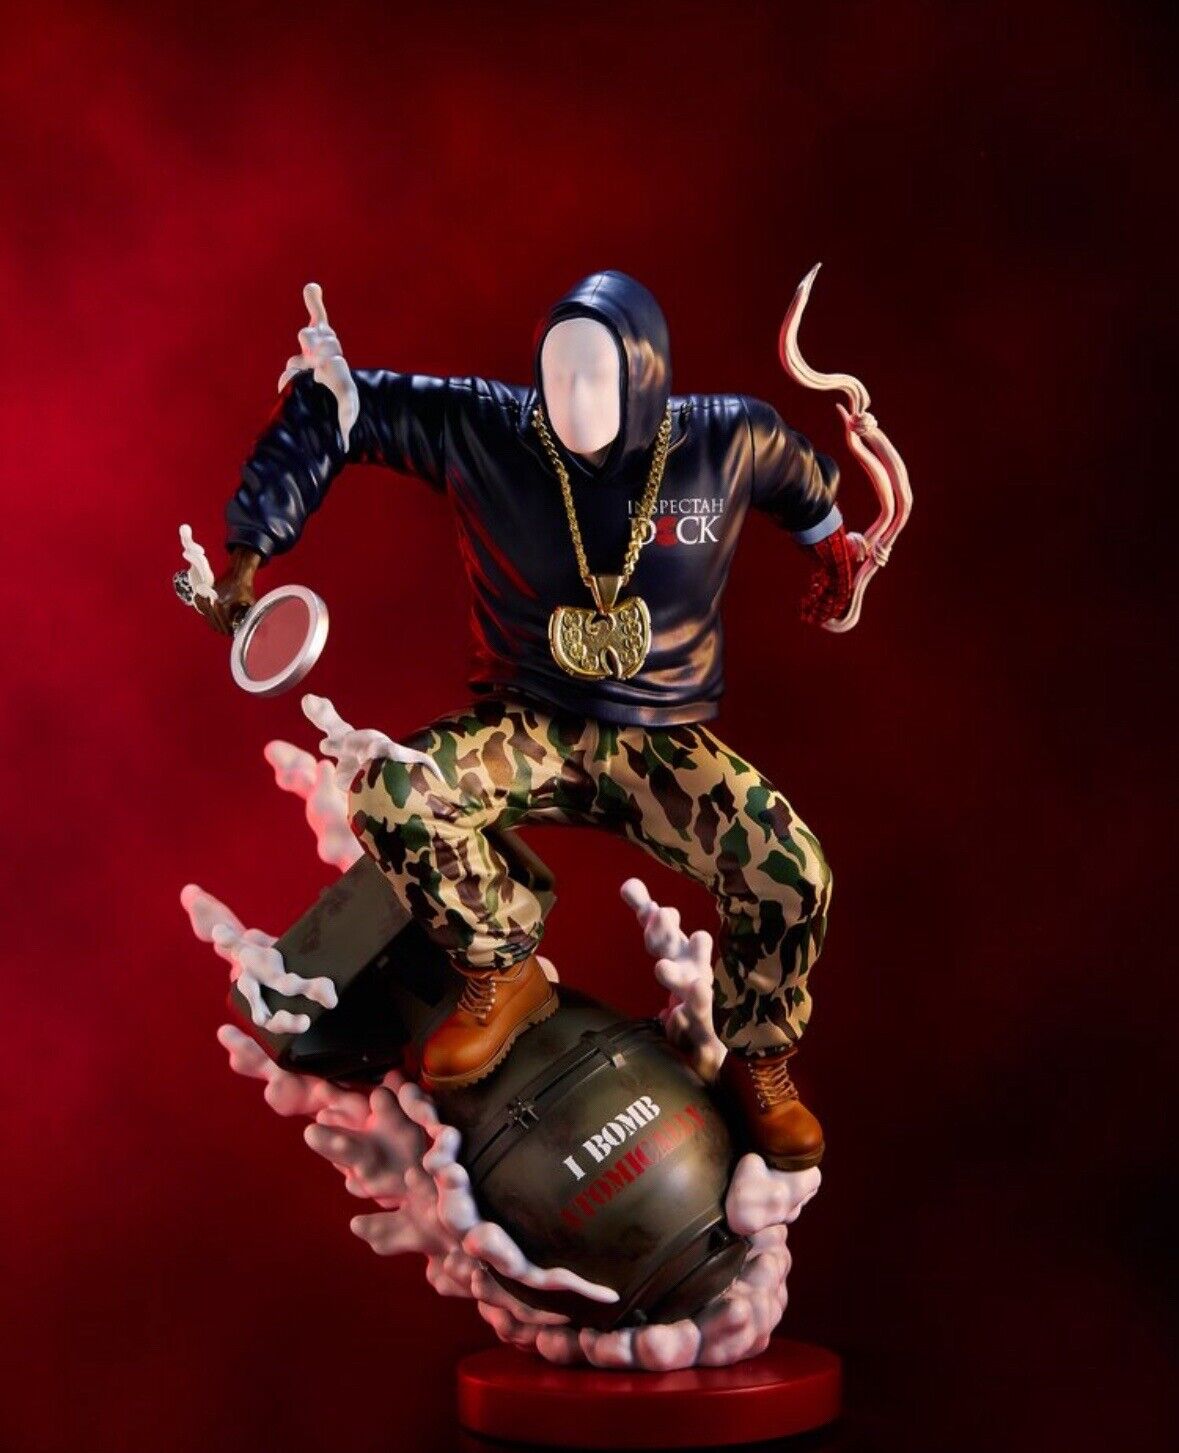 Inspectah Deck Wu-Tang concrete jungle statue / Limited Edition/ Signed